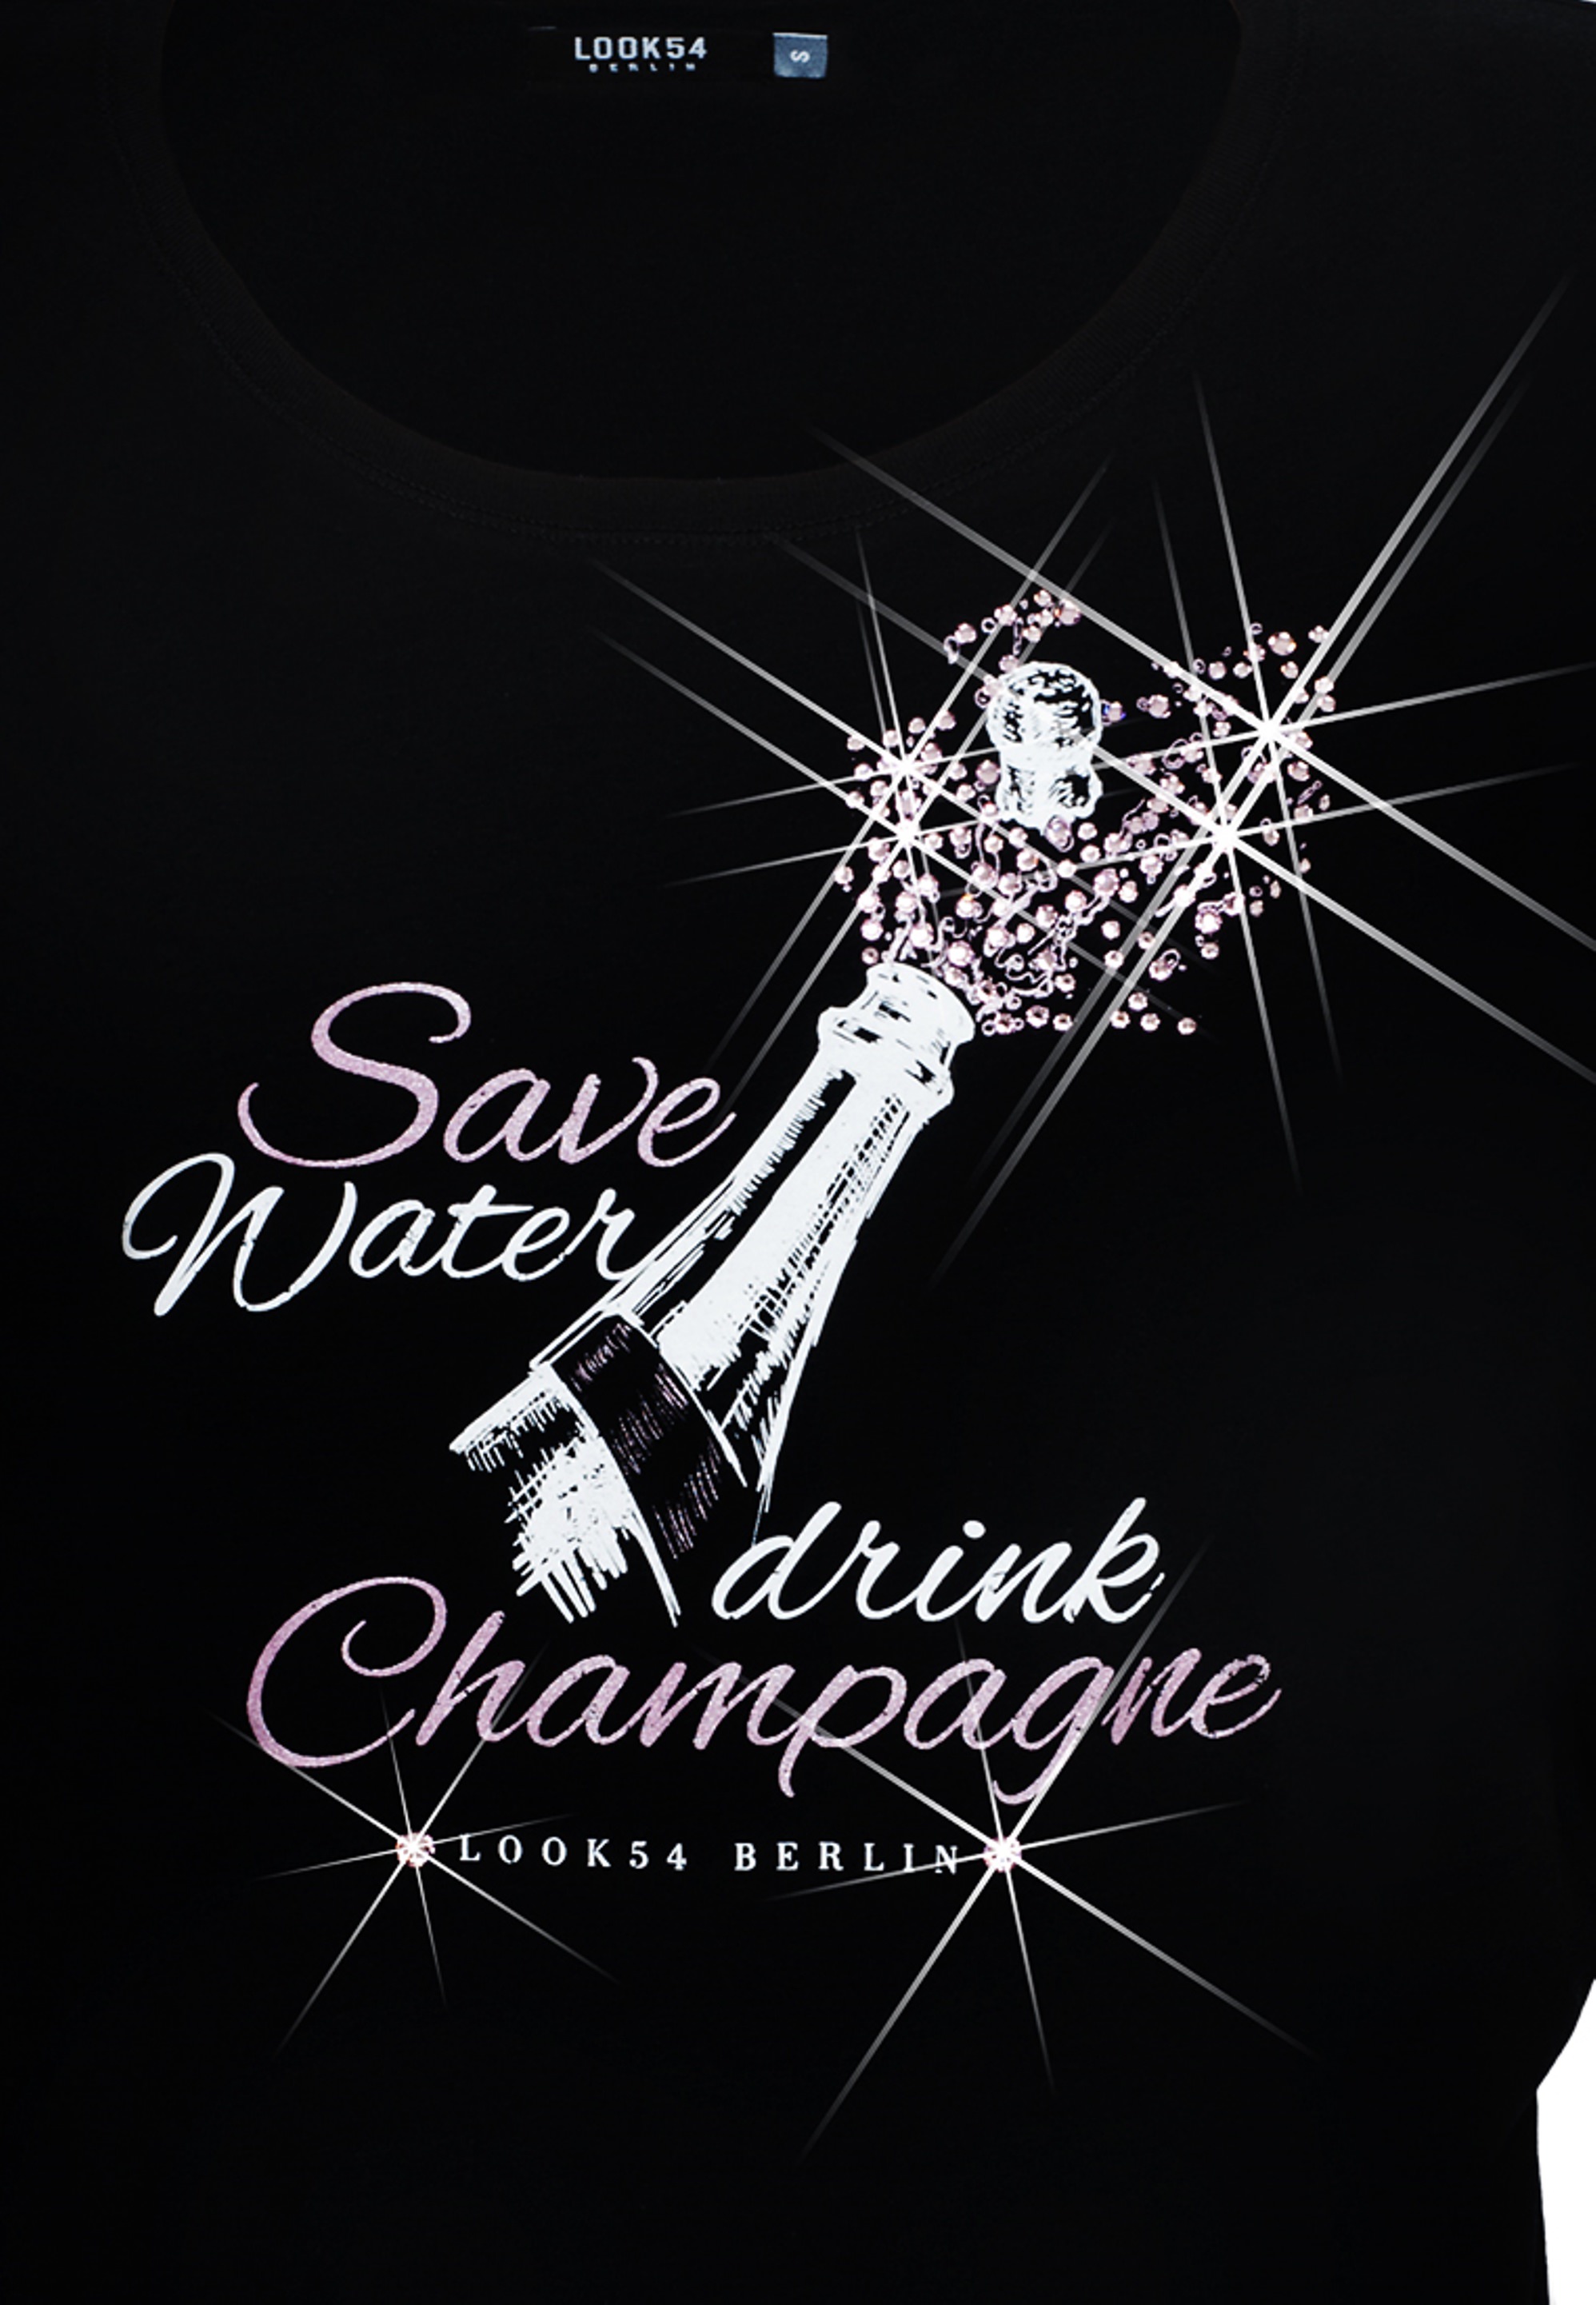 Drink Champagne - Batwing Shirt